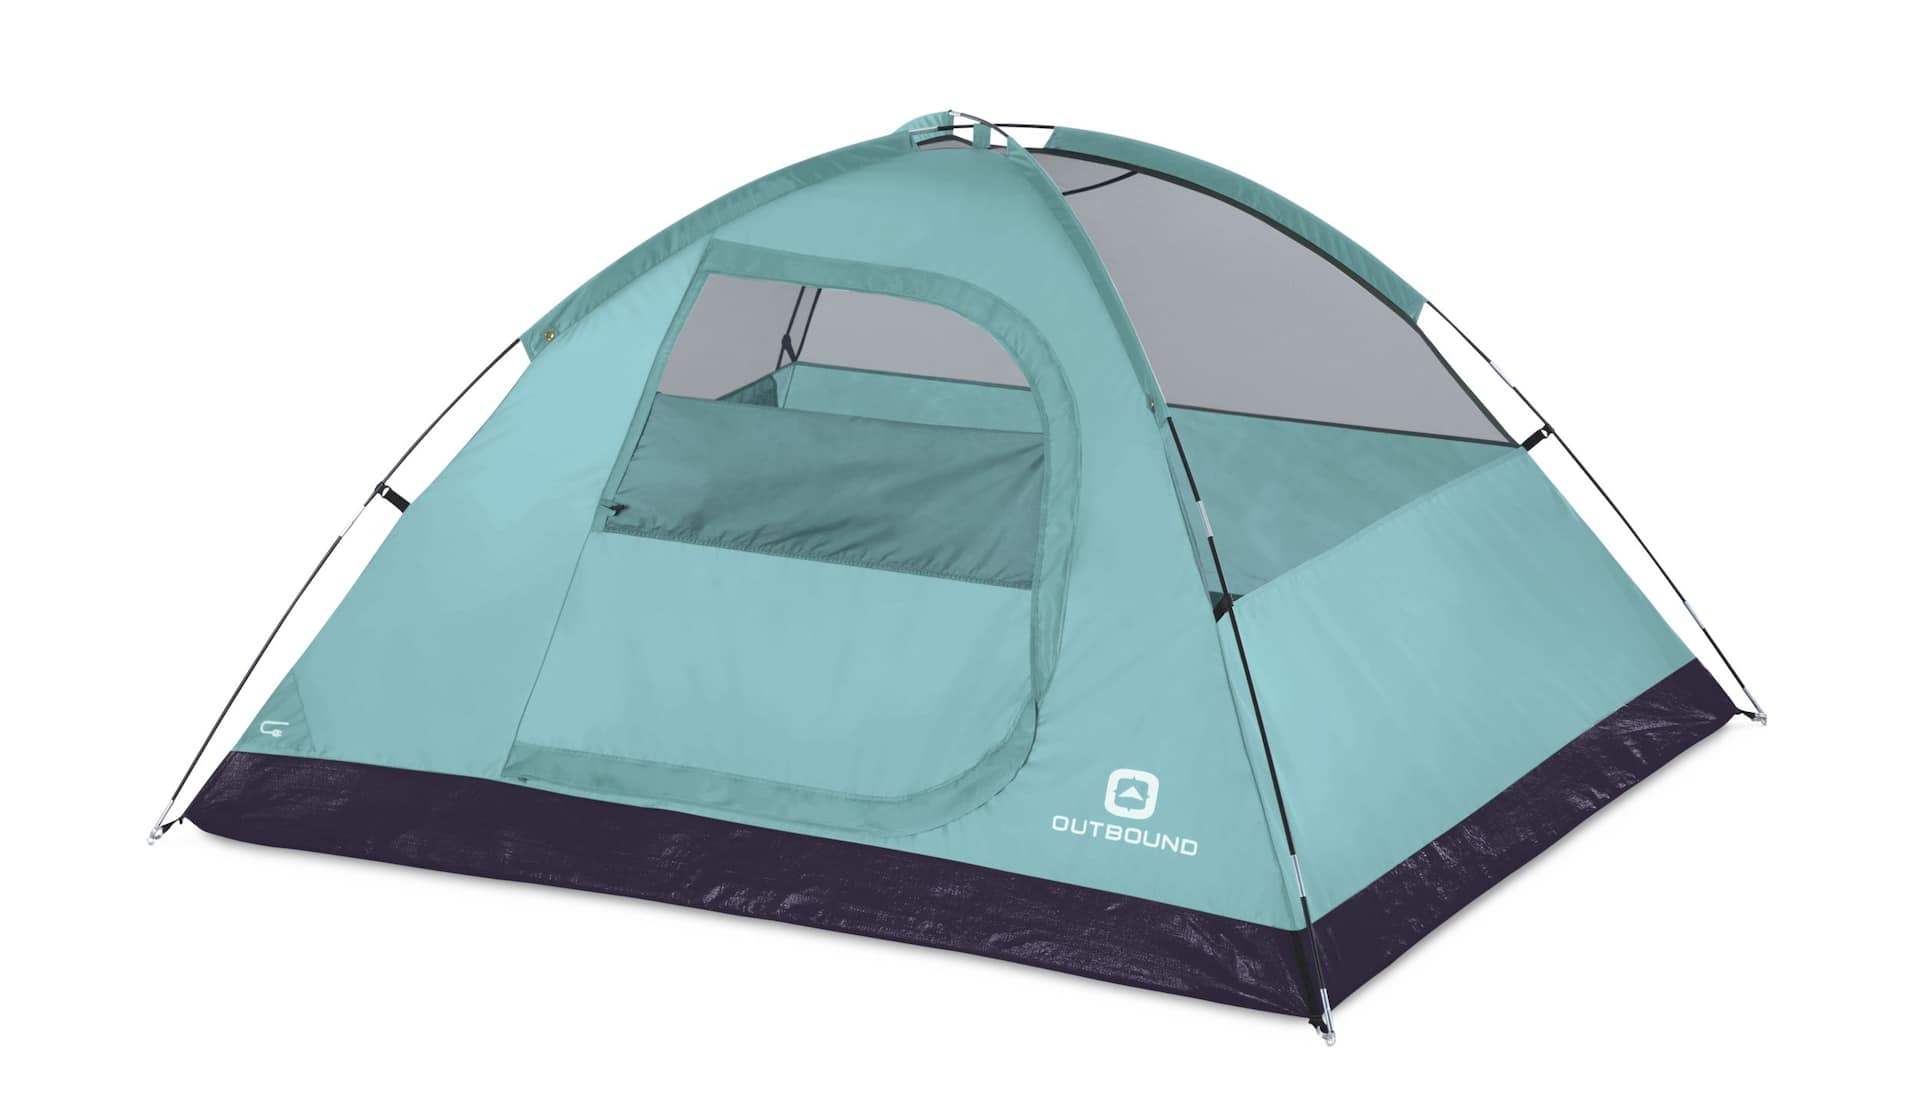 Outbound 3-Season, 3-Person Easy Set-Up Camping Dome Tent w/ Rain Fly &  Carry Bag